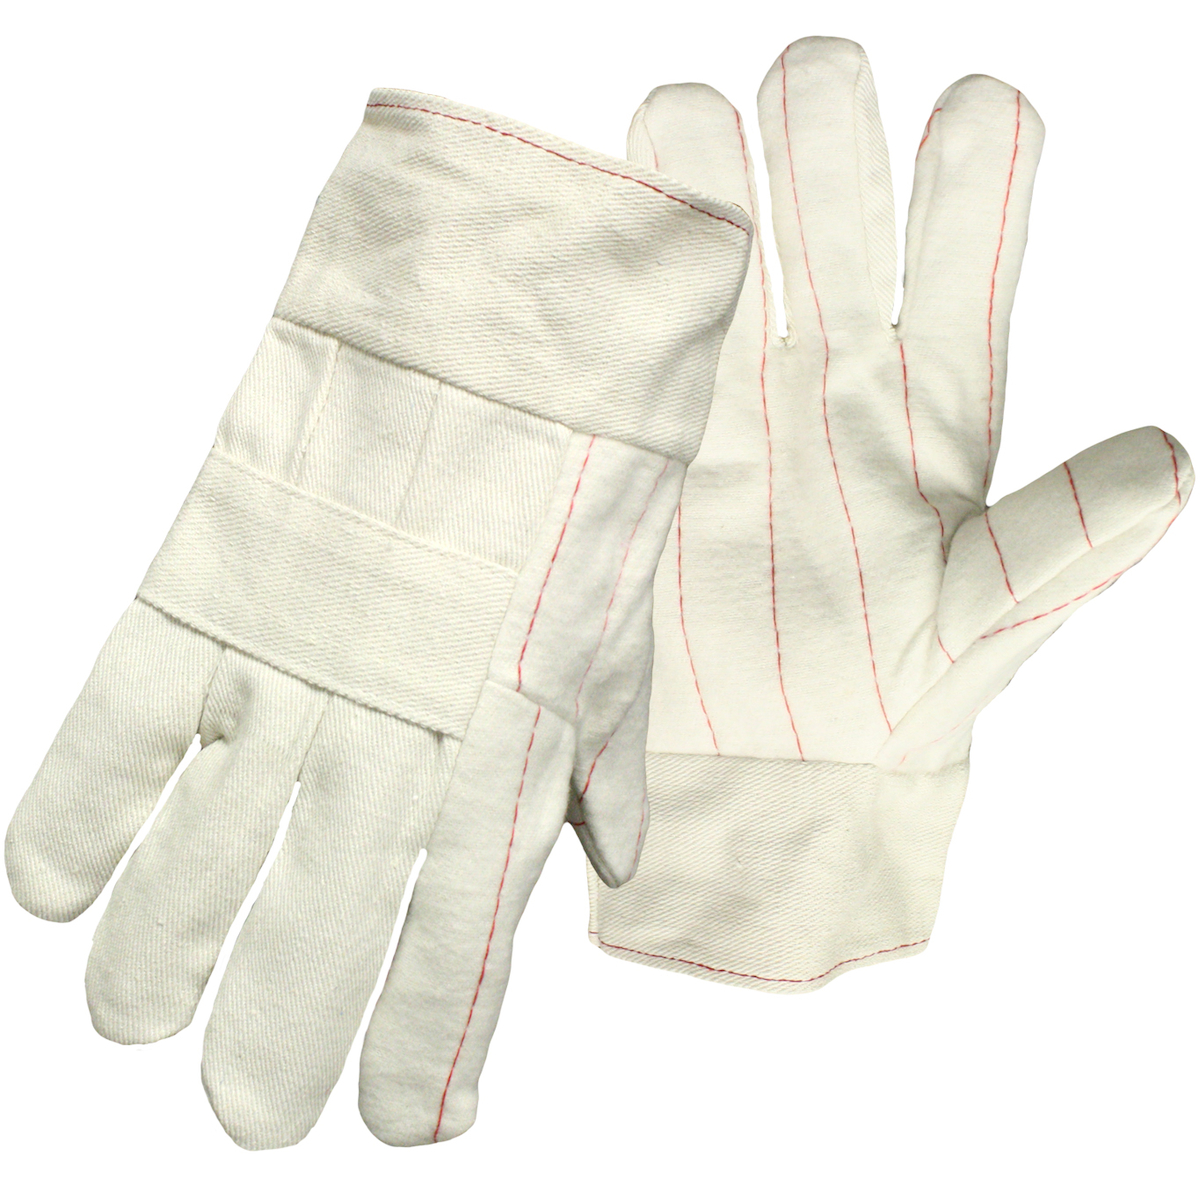 PIP Hot Mill Glove with Band Top Cuff - Spill Control